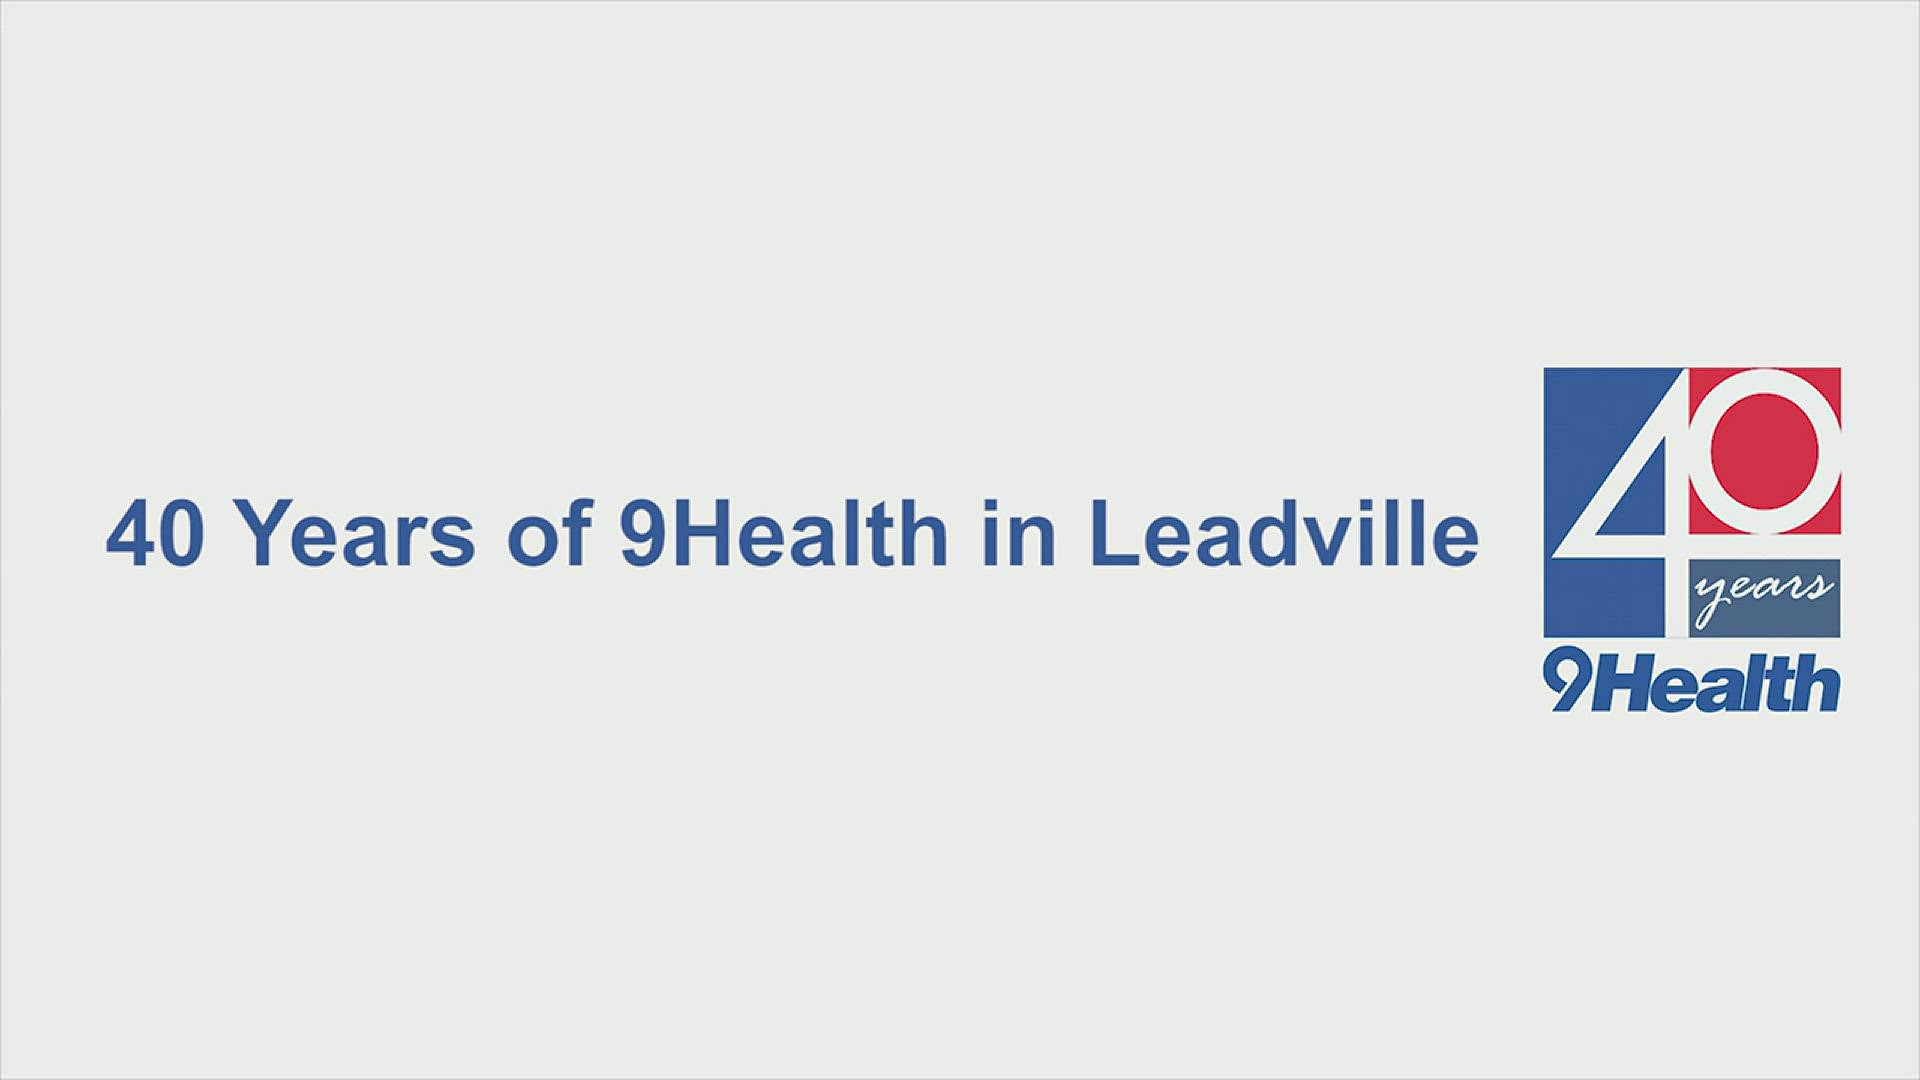 9Health Fair is celebrating 40 years of providing Coloradans access to important preventive health screenings and education, and the 9Health Fair in Leadville, CO has been running since the beginning.